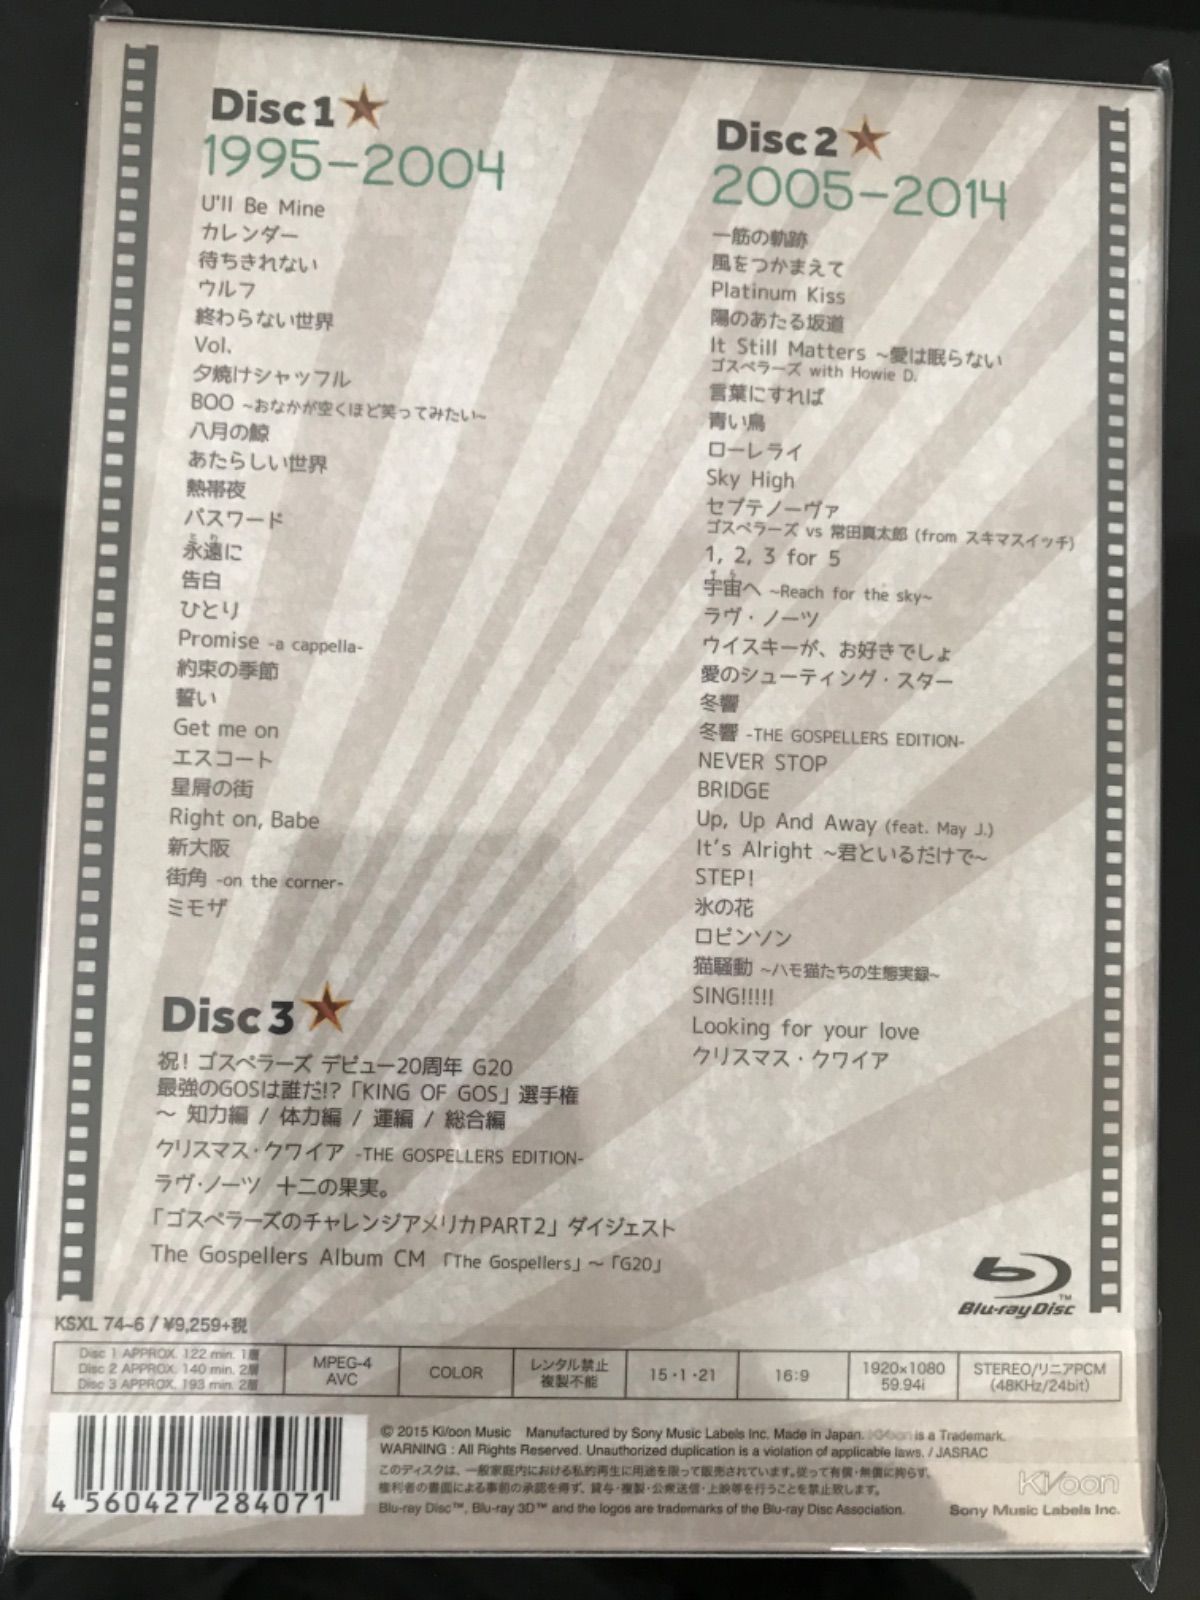 THE GOSPELLERS CLIPS 完全生産限定 - DISC Record - メルカリ